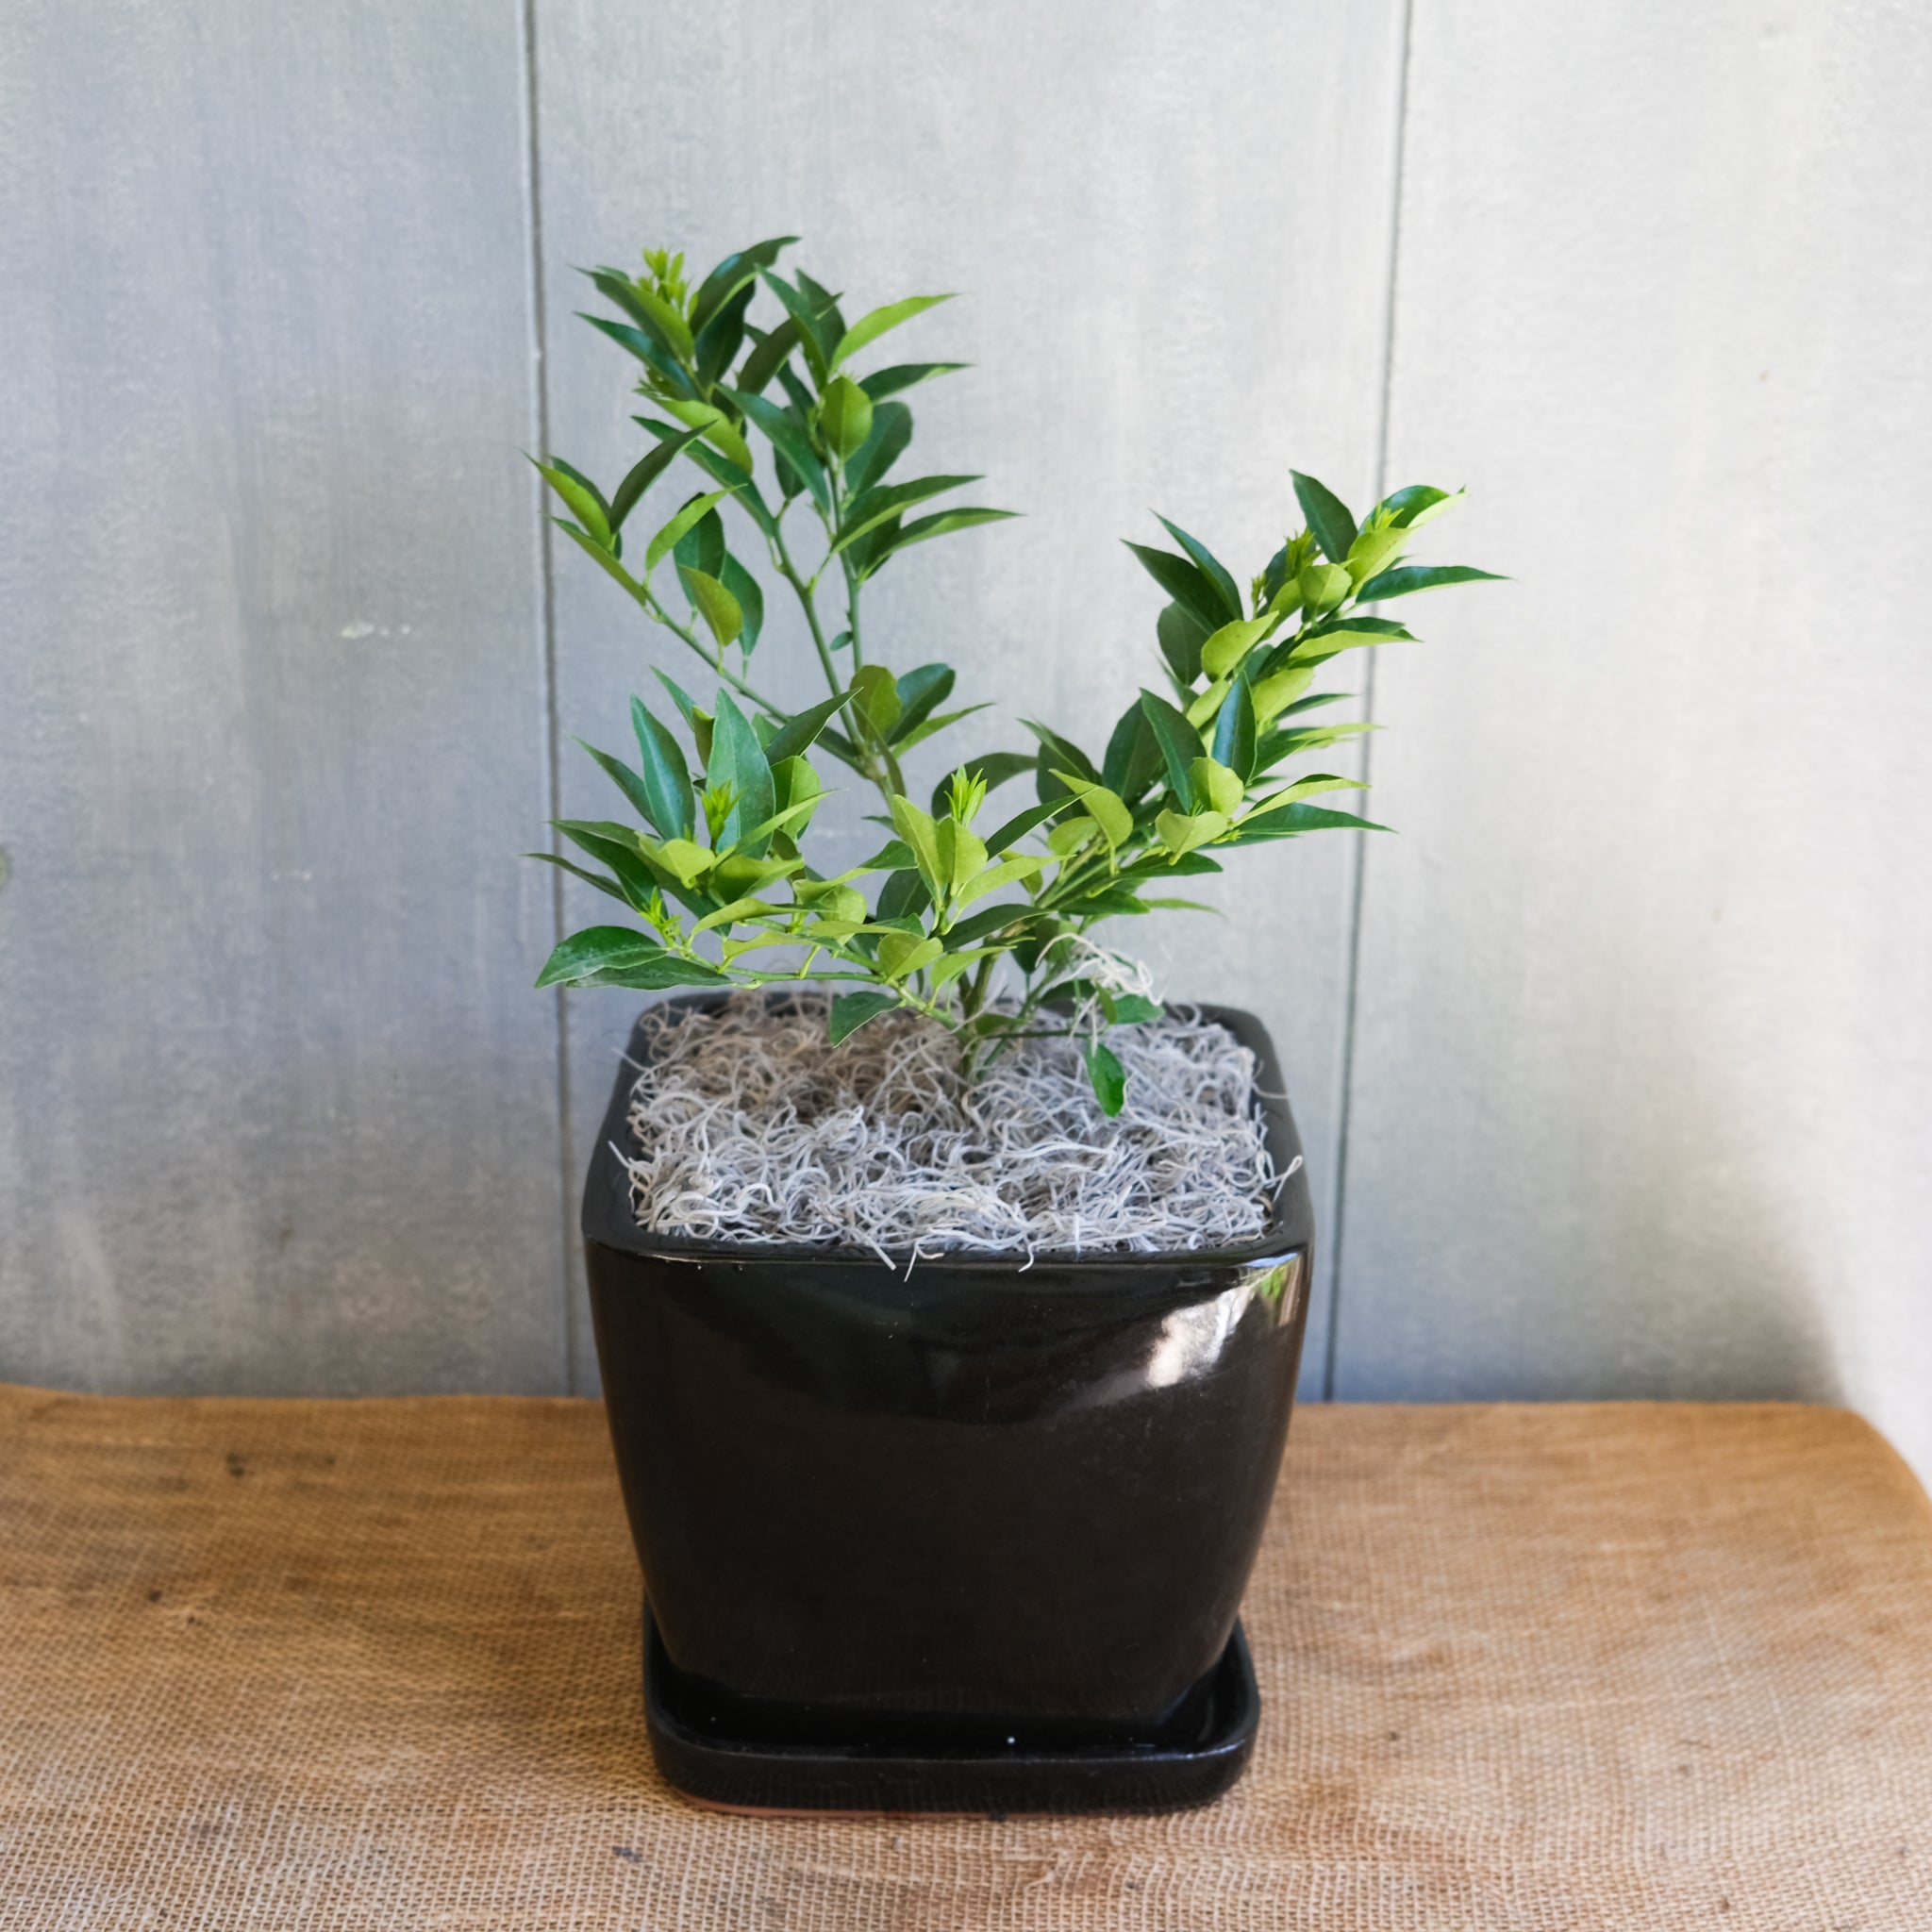 Key lime plant in a black, glazed pot, dressed with Spanish moss.